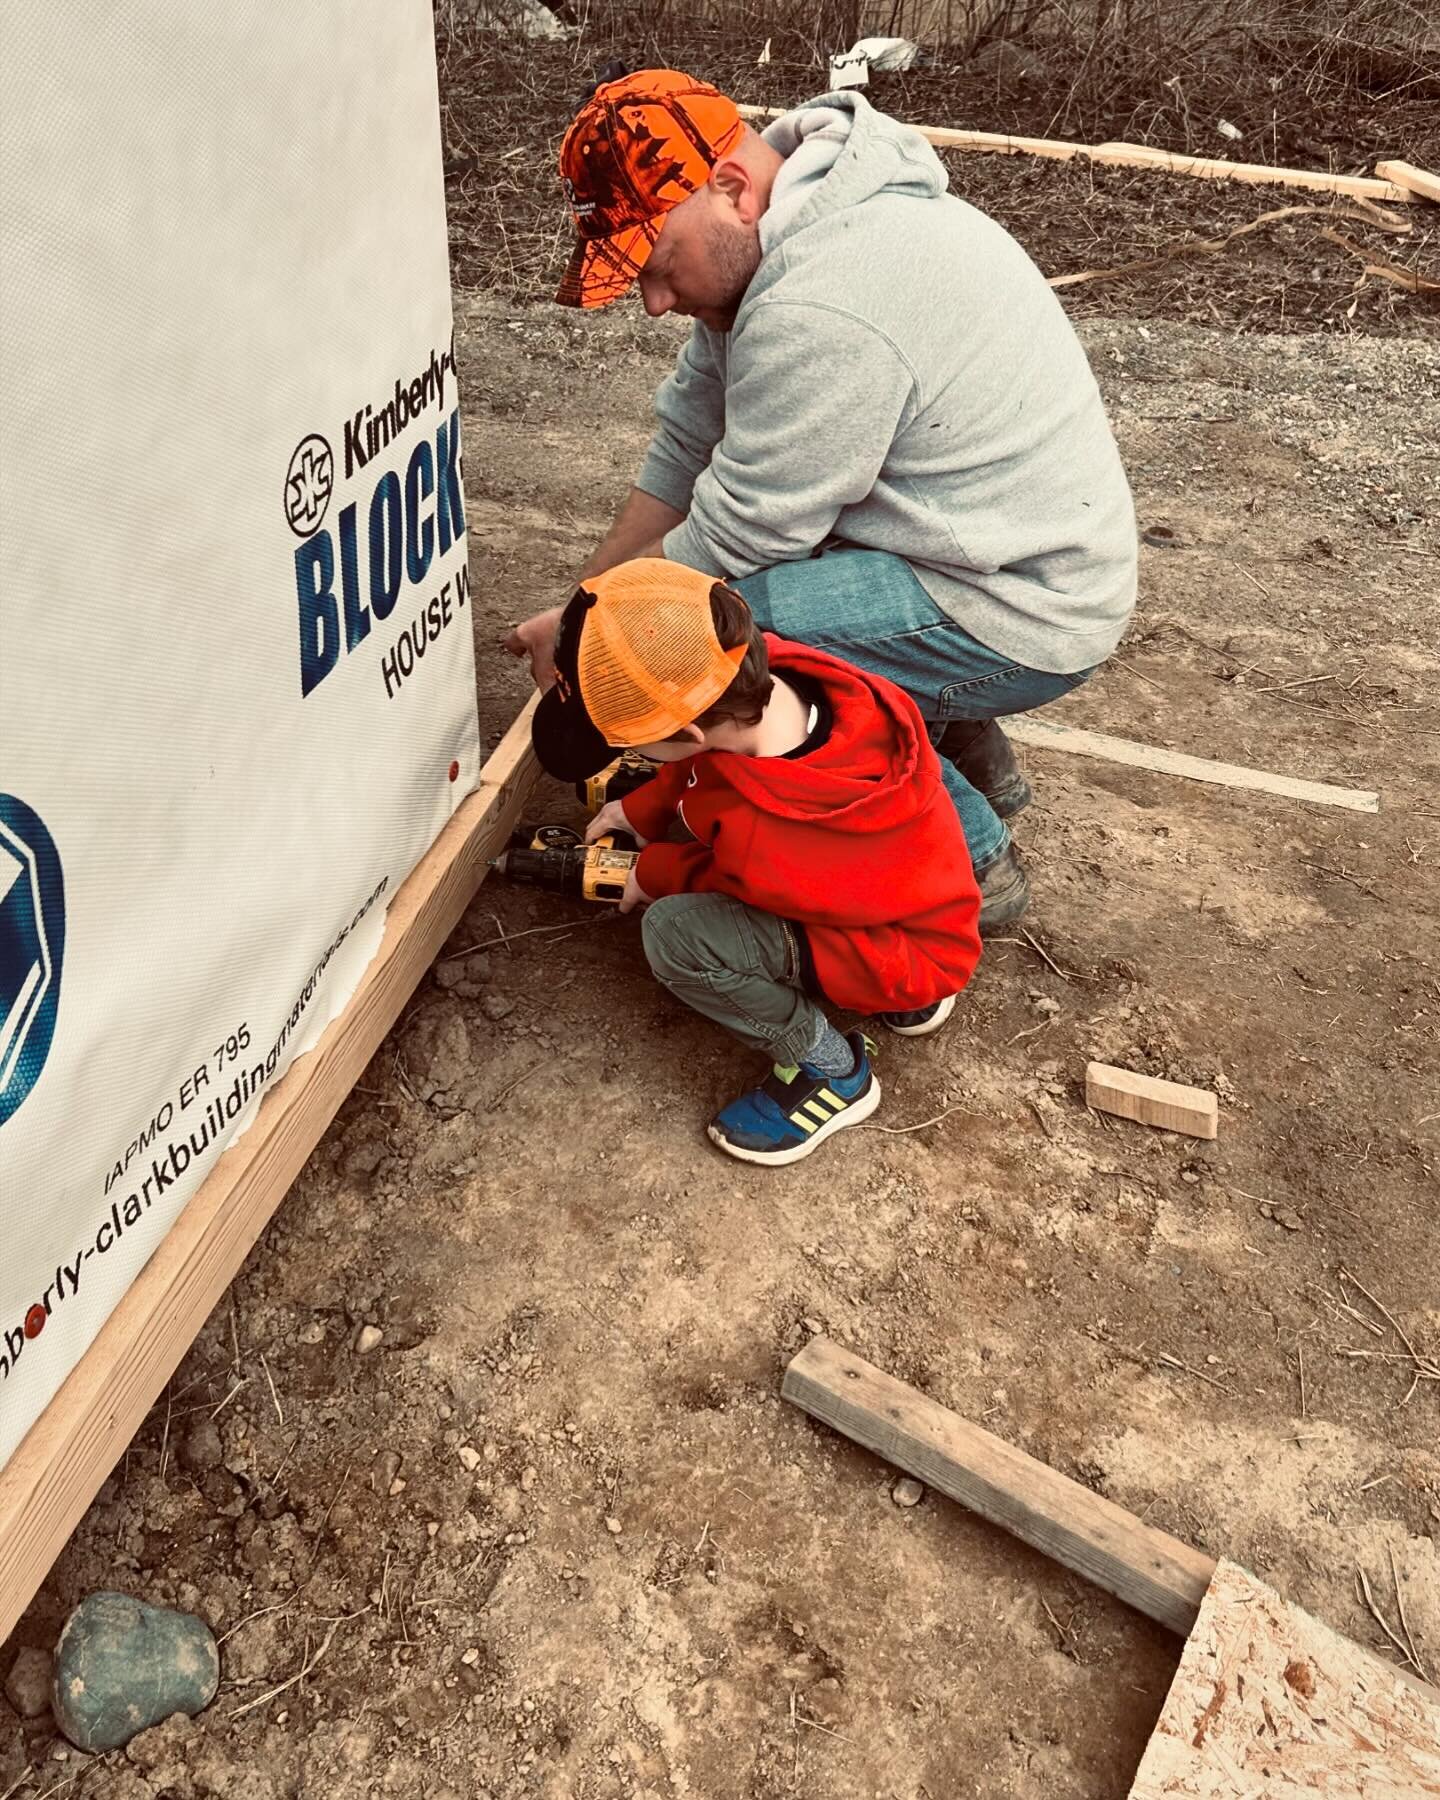 Father and Son construction 🧡 What a beautiful day for family time at the farm. 

We are currently trying to wrap up our projects to have water and power up and running soon! 

#family #farm #familyfarm #familyfarming #farmlife #farmprojects #father